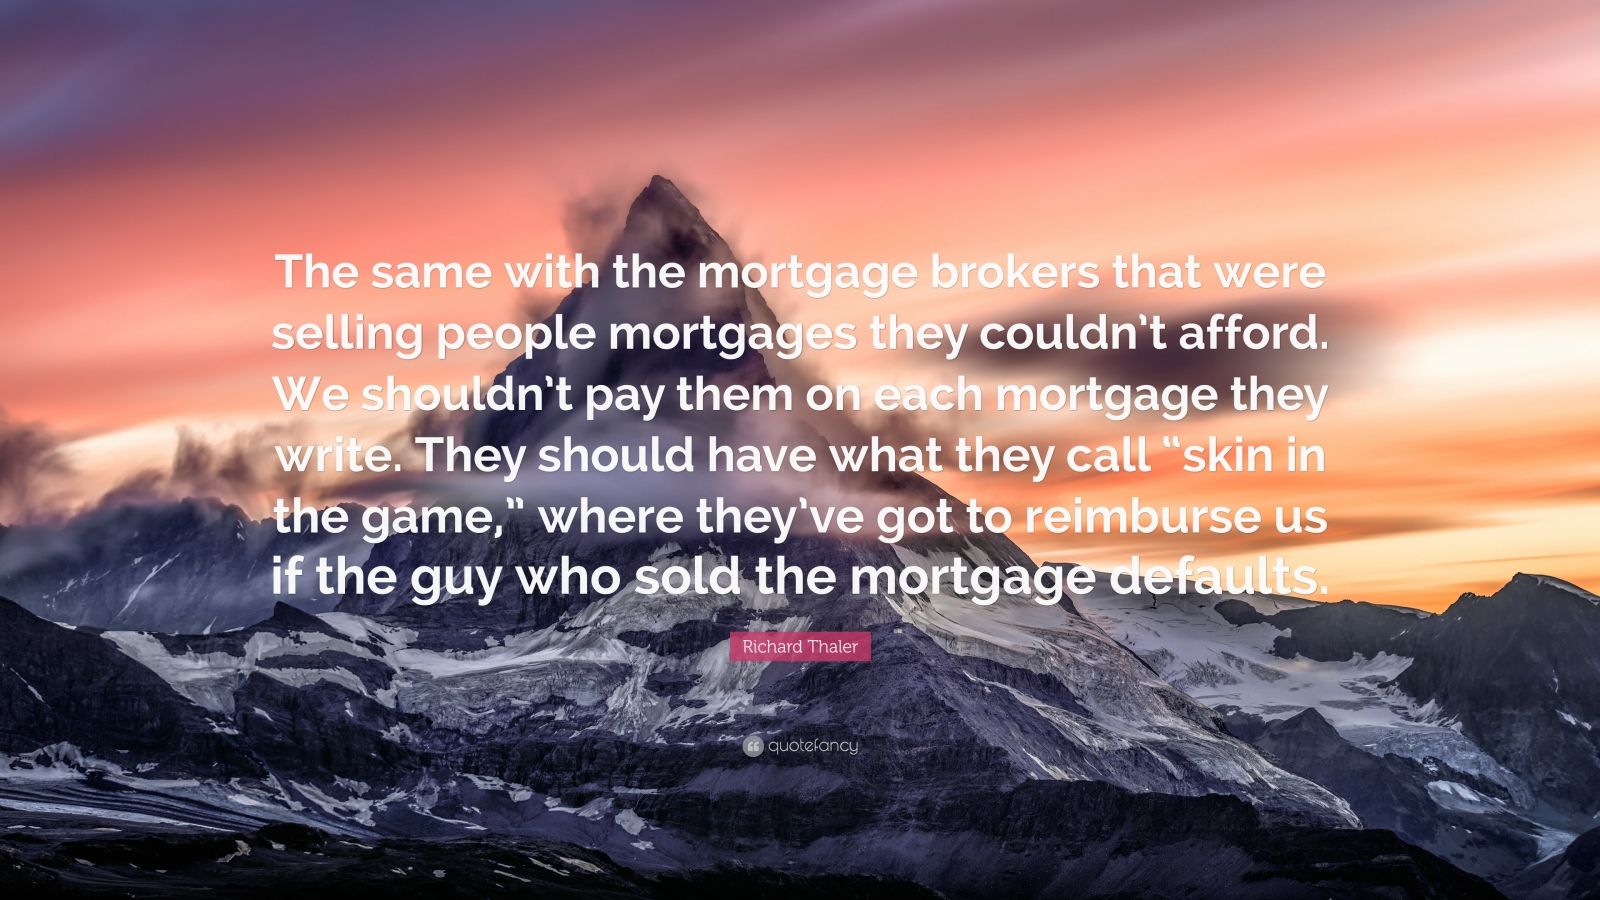 Richard Thaler Quote: “The same with the mortgage brokers that were